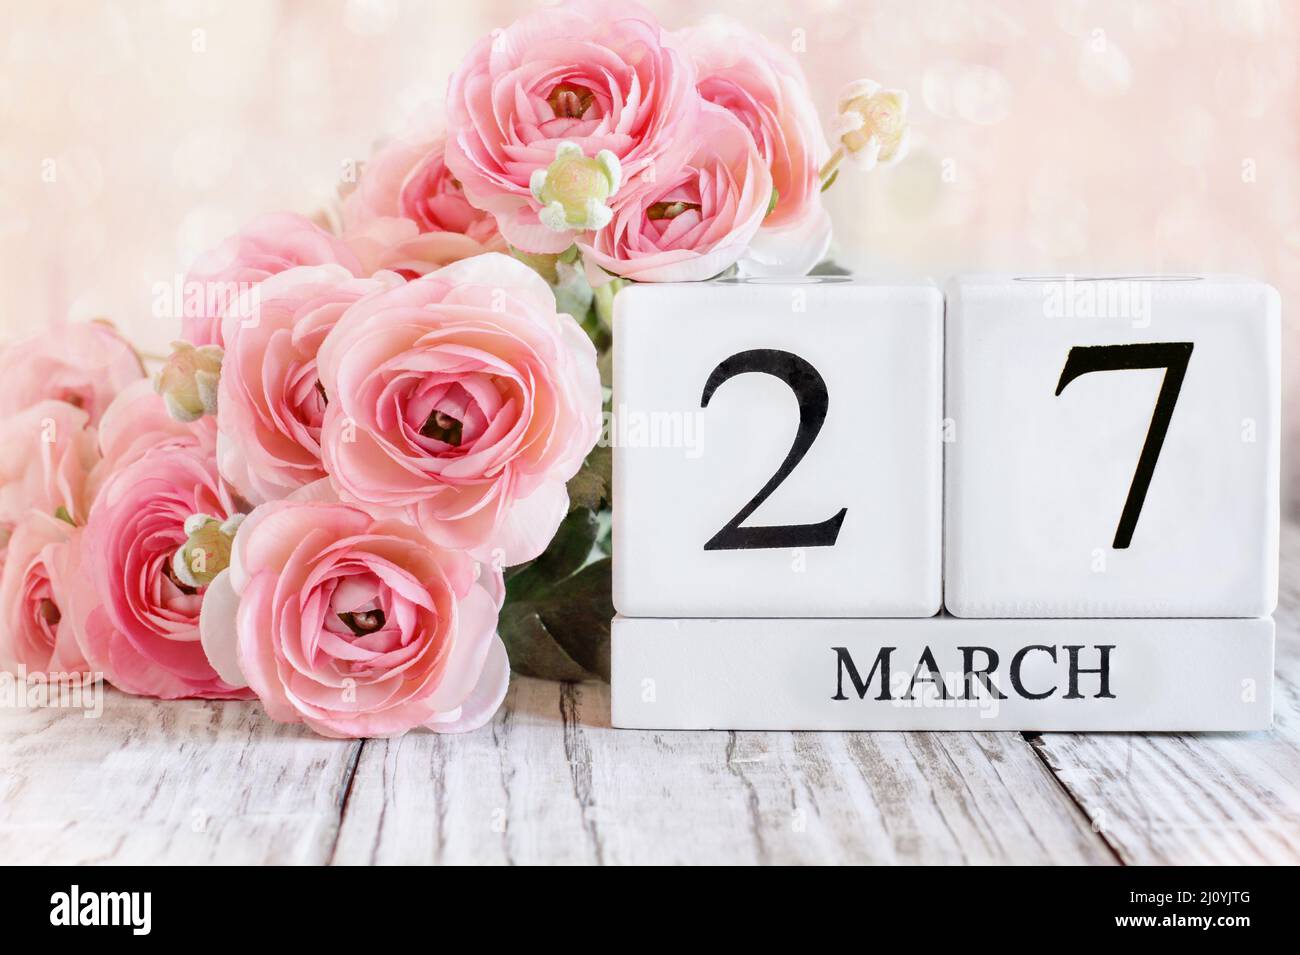 White wood calendar blocks with the date March 27th and pink ranunculus flowers over a wooden table. Selective focus with blurred background. Stock Photo